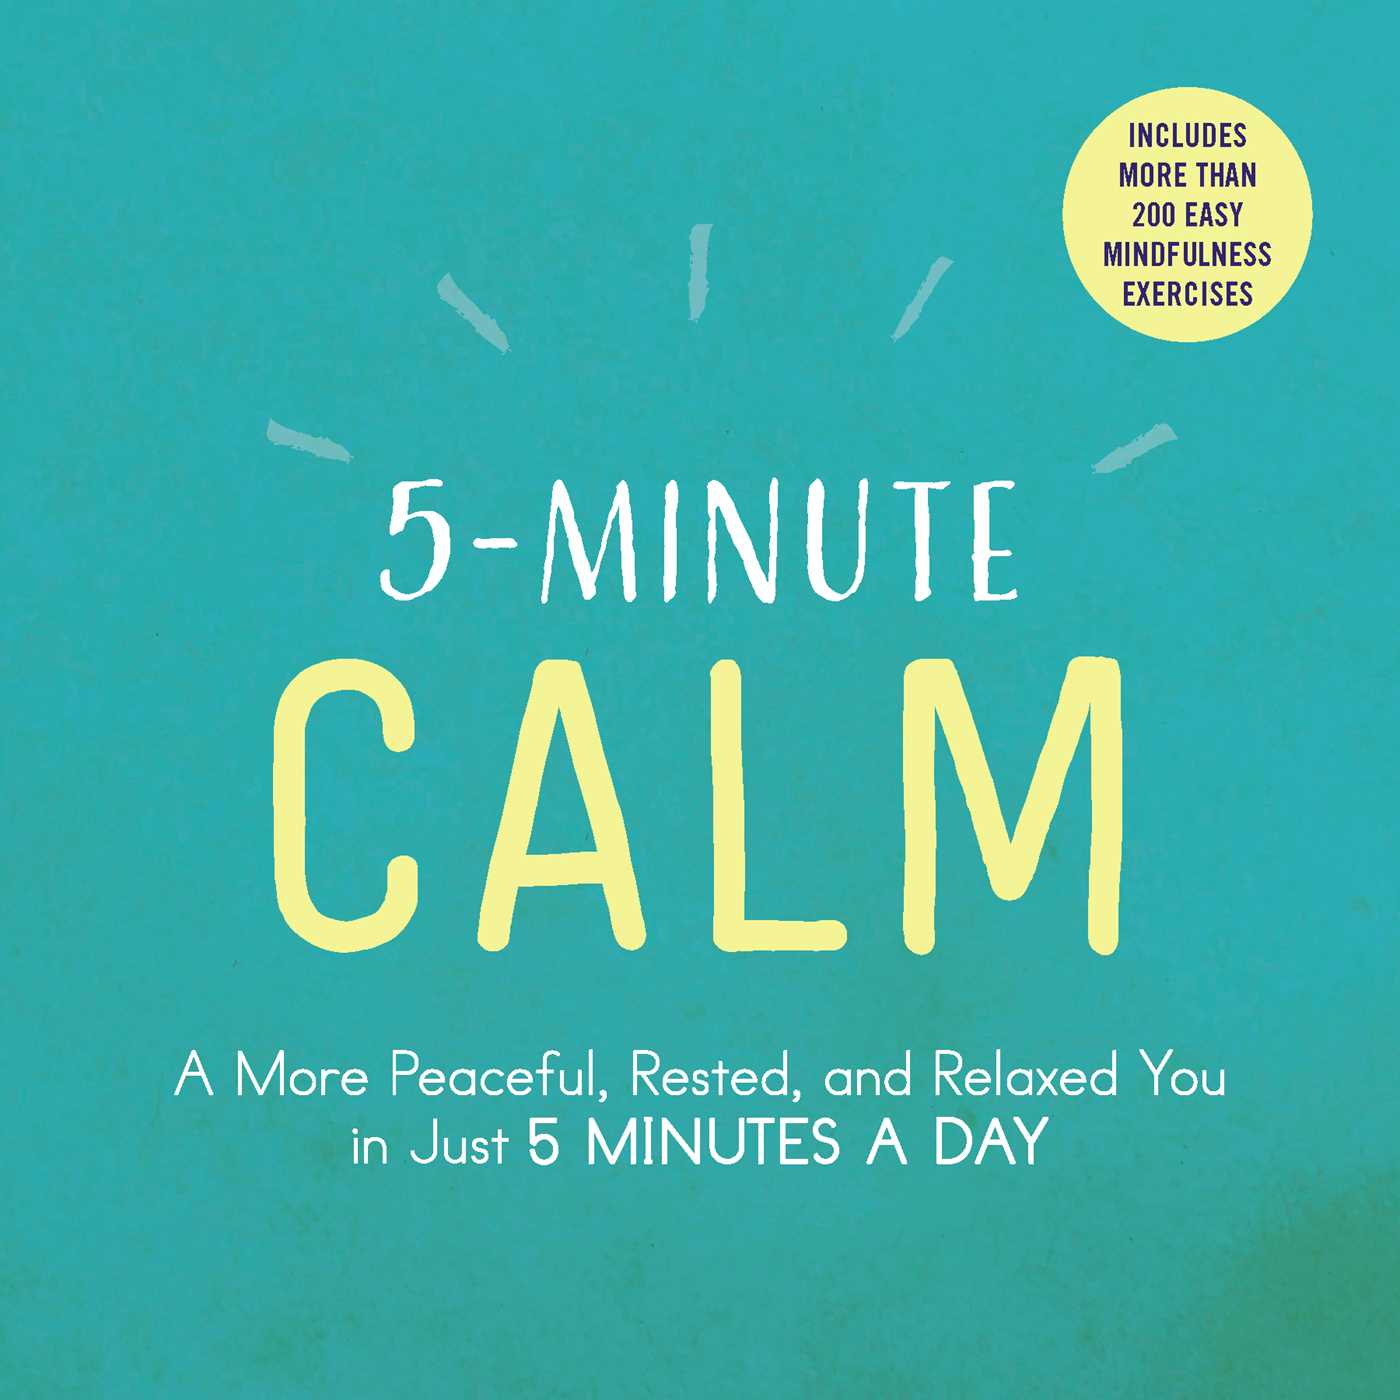 5-Minute Calm : A More Peaceful, Rested, and Relaxed You in Just 5 Minutes a Day